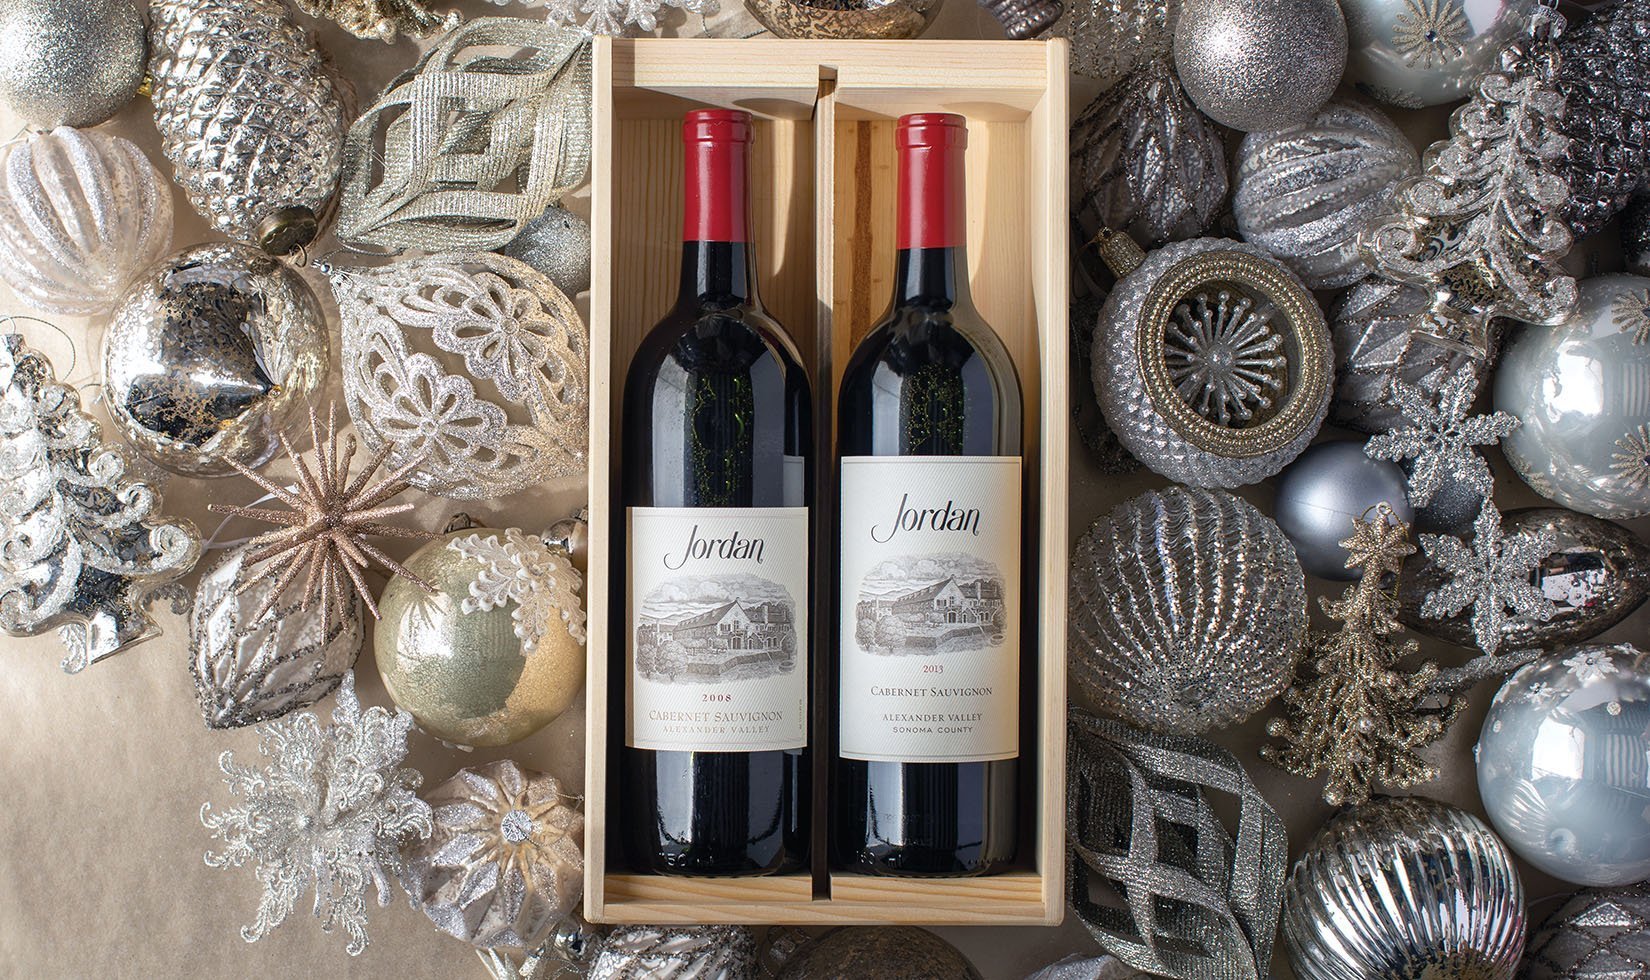 One bottle each of the 2008 and 2013 Jordan Cabernet Sauvignon in a wood box nestled around silver ornaments